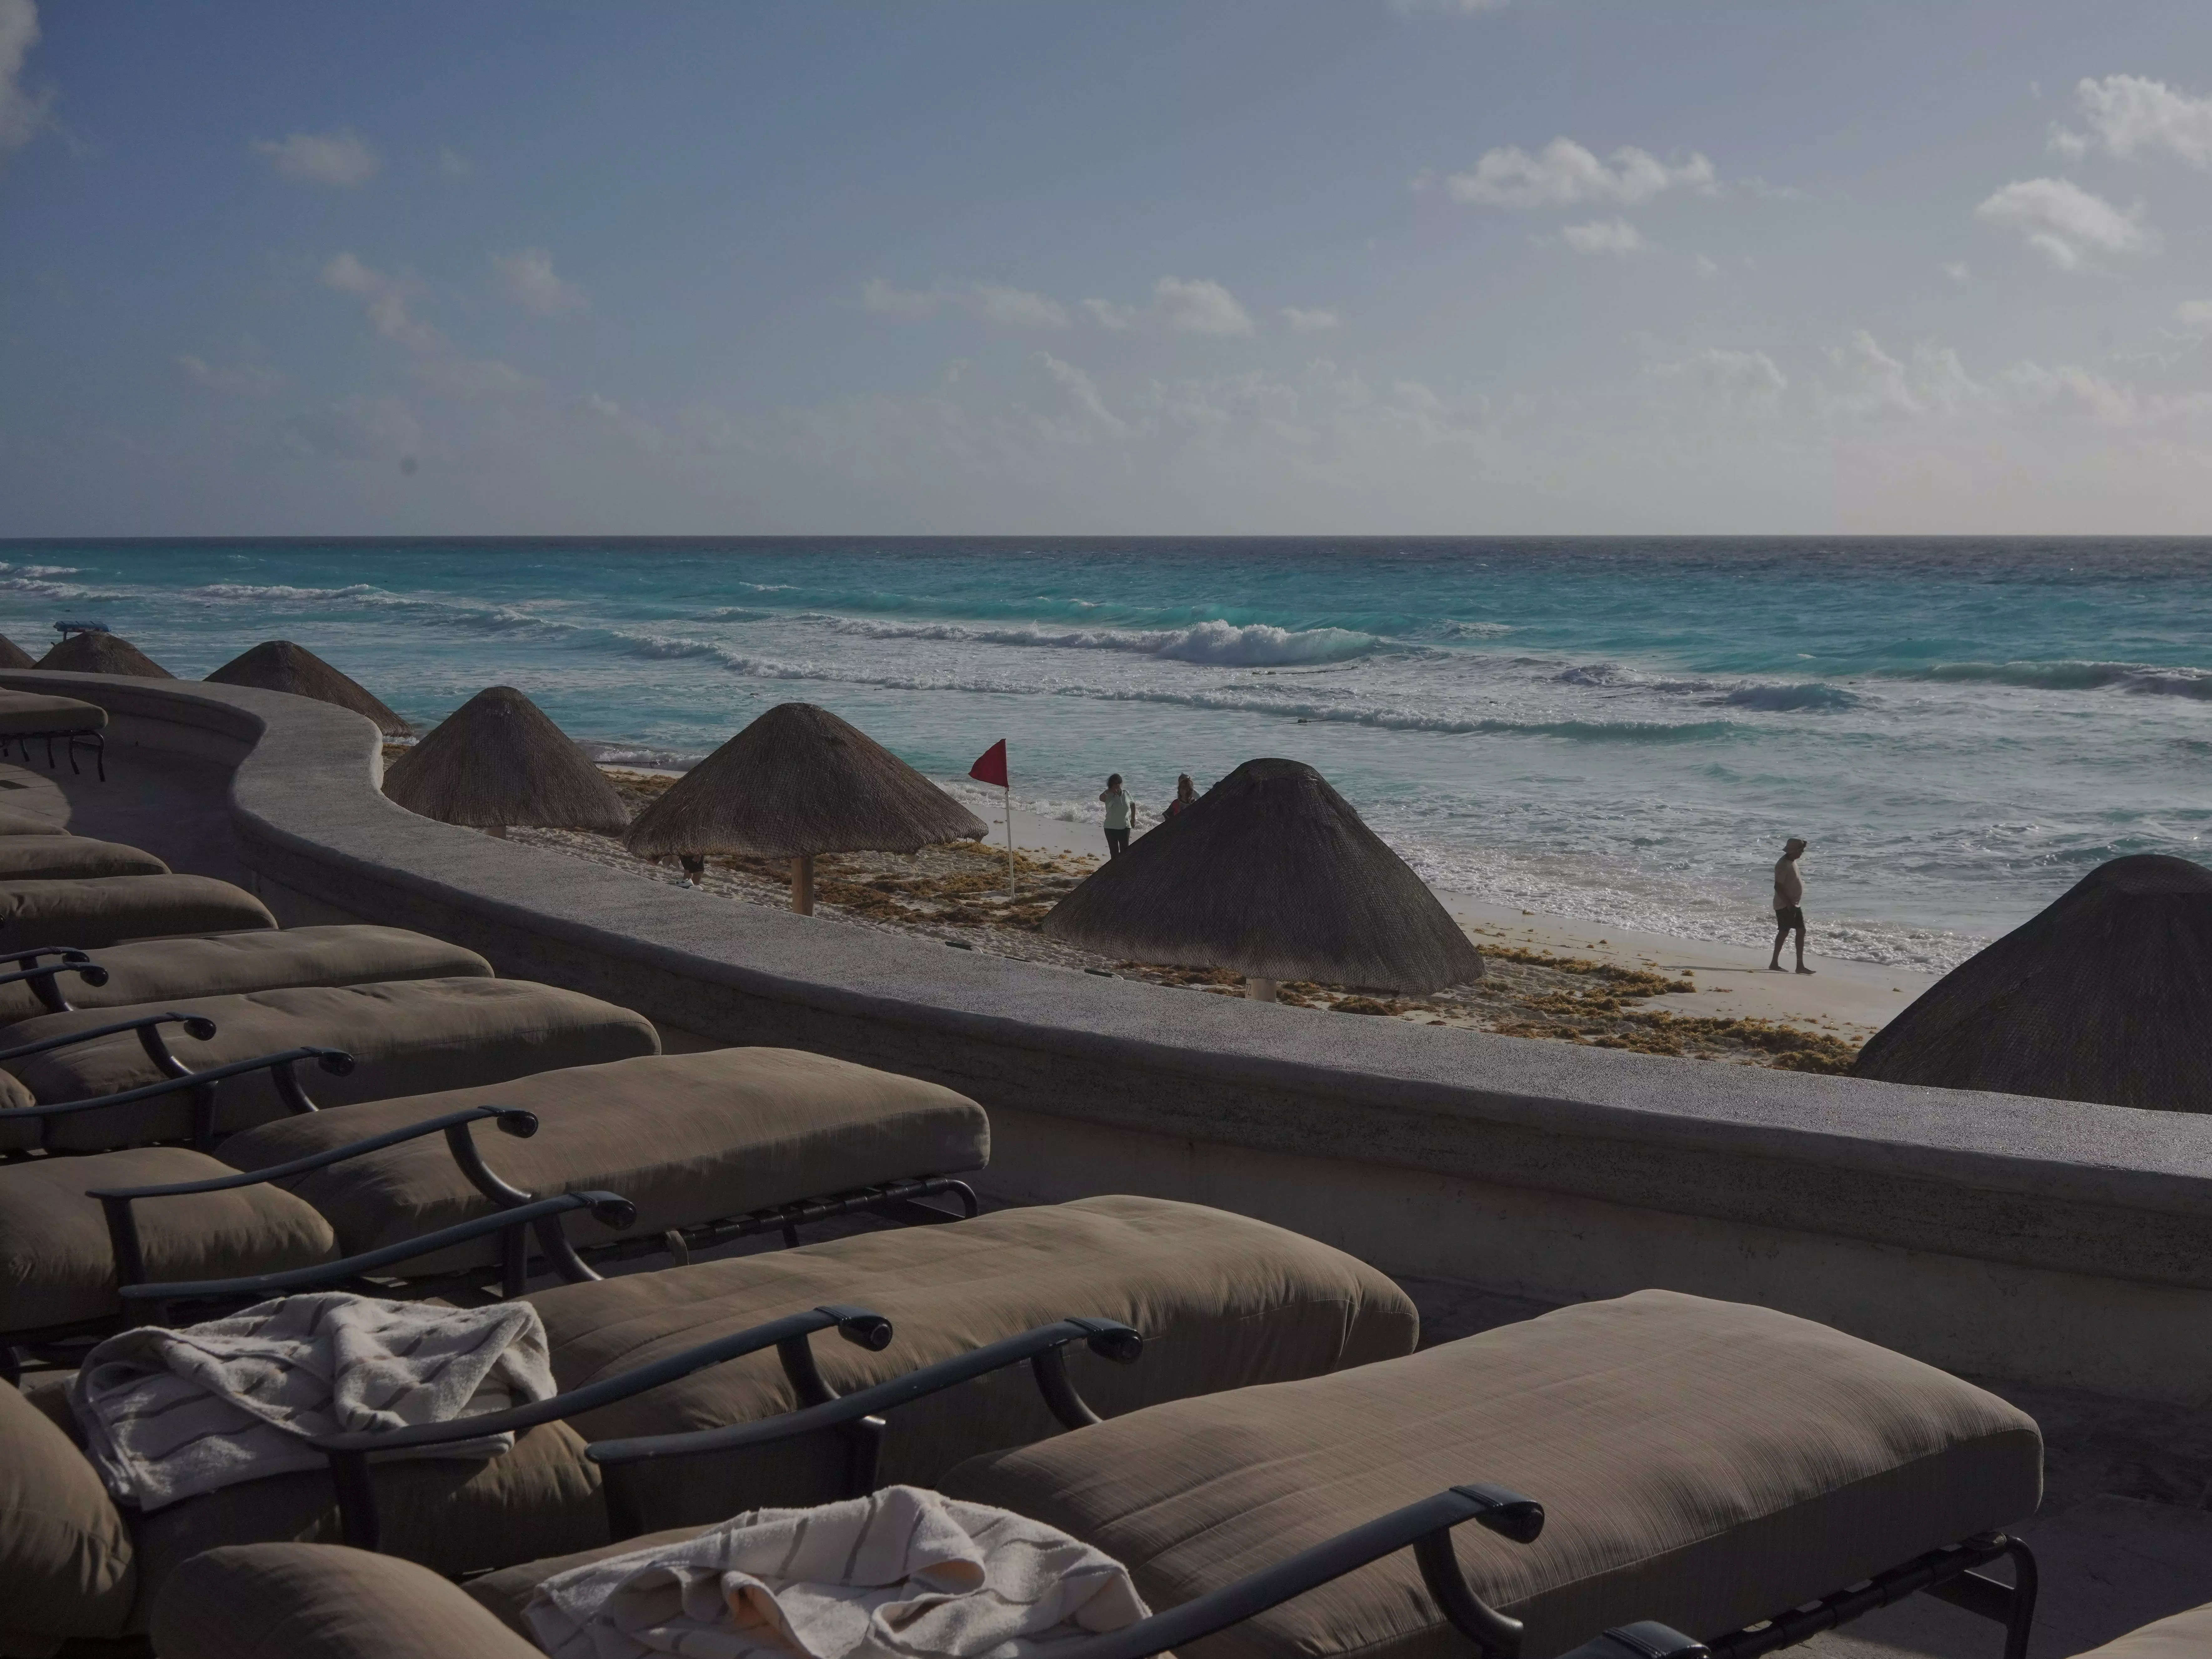 JW Marriott beaches with seating facing beach and sand dunes by water